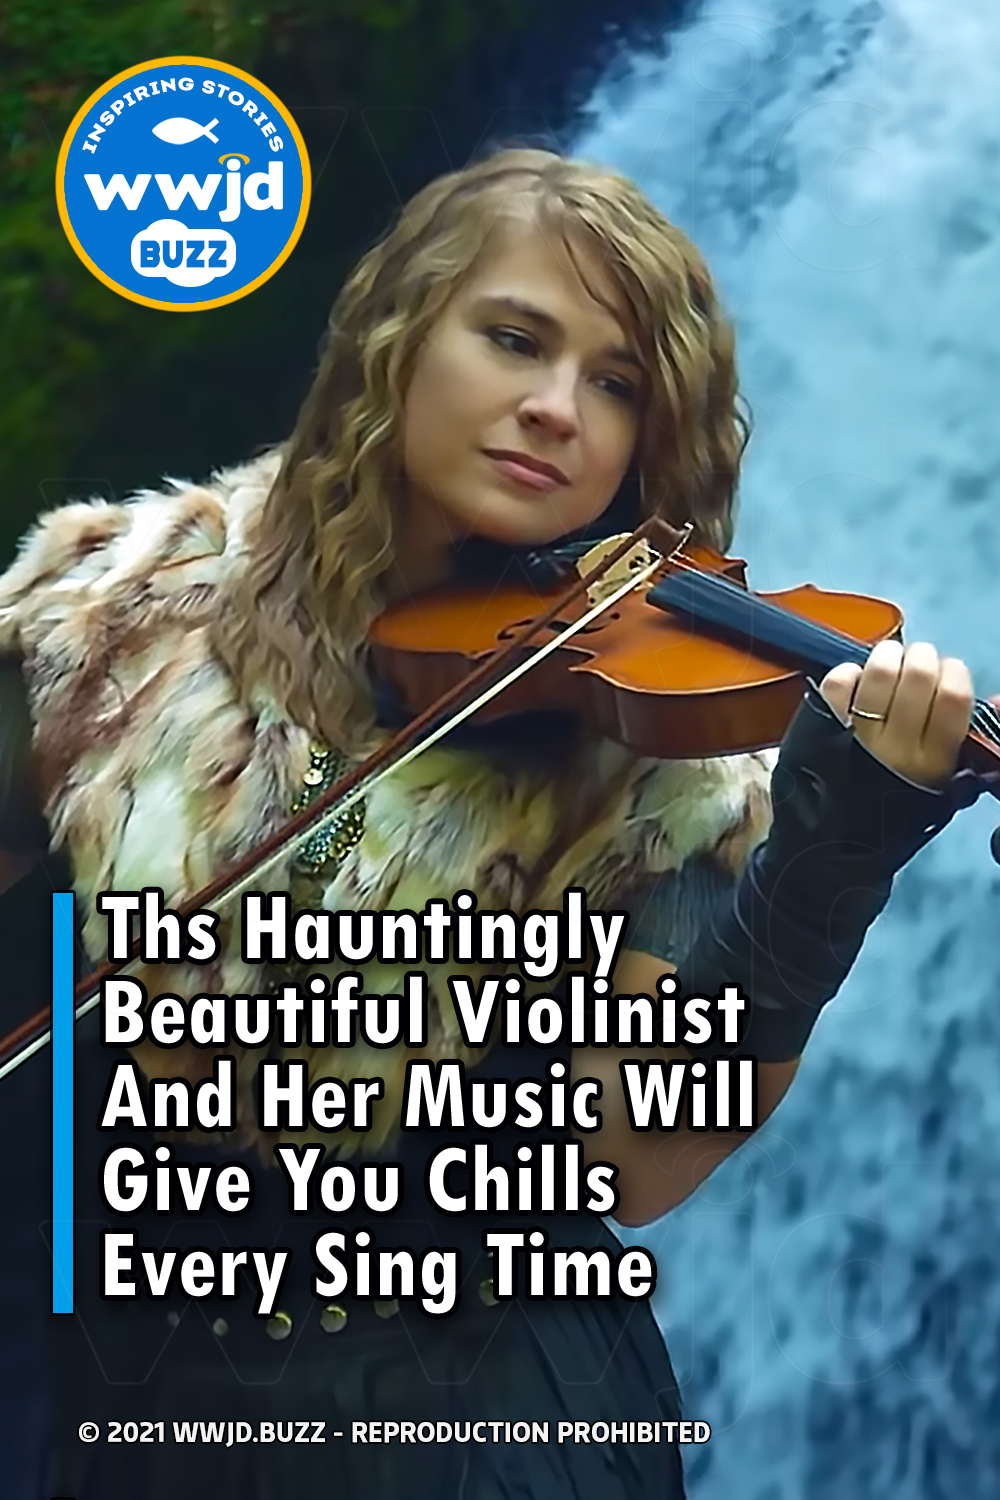 This Hauntingly Beautiful Violinist And Her Music Will Give You Chills Every Single Time